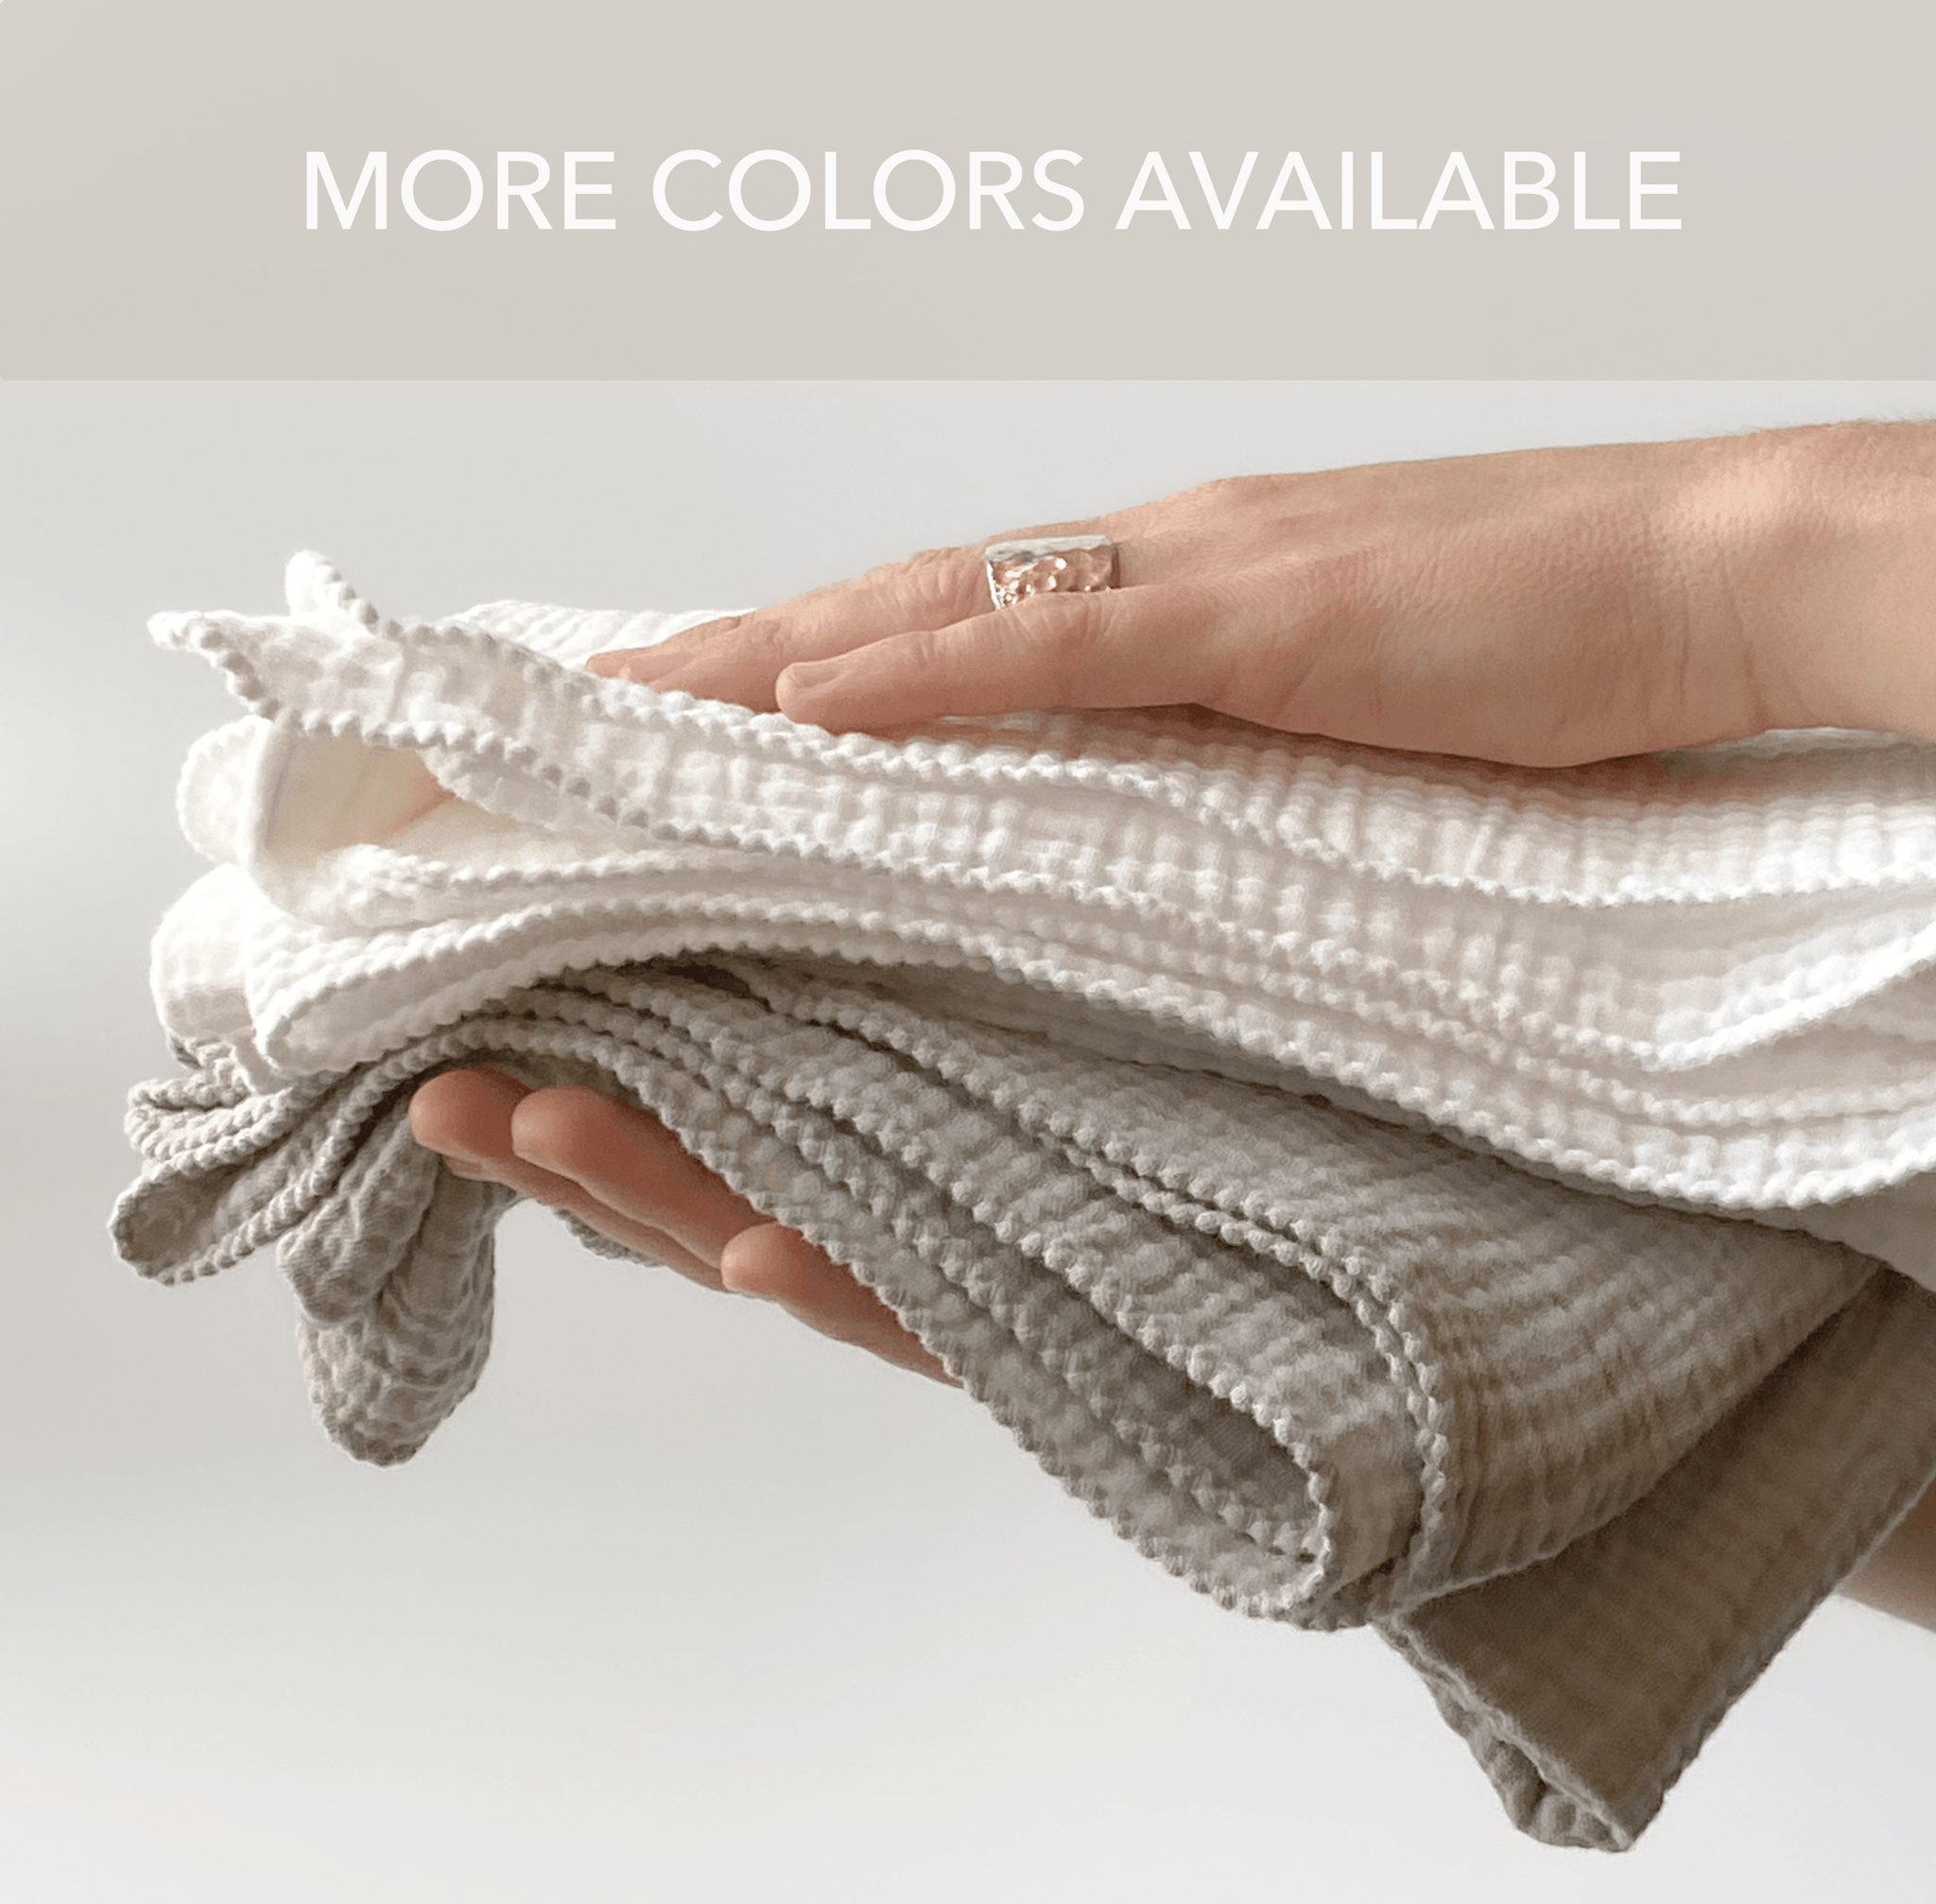 Thin Cotton Muslin Towel - MEDIUM 24X40 - Many Colors Available - Charley Charles